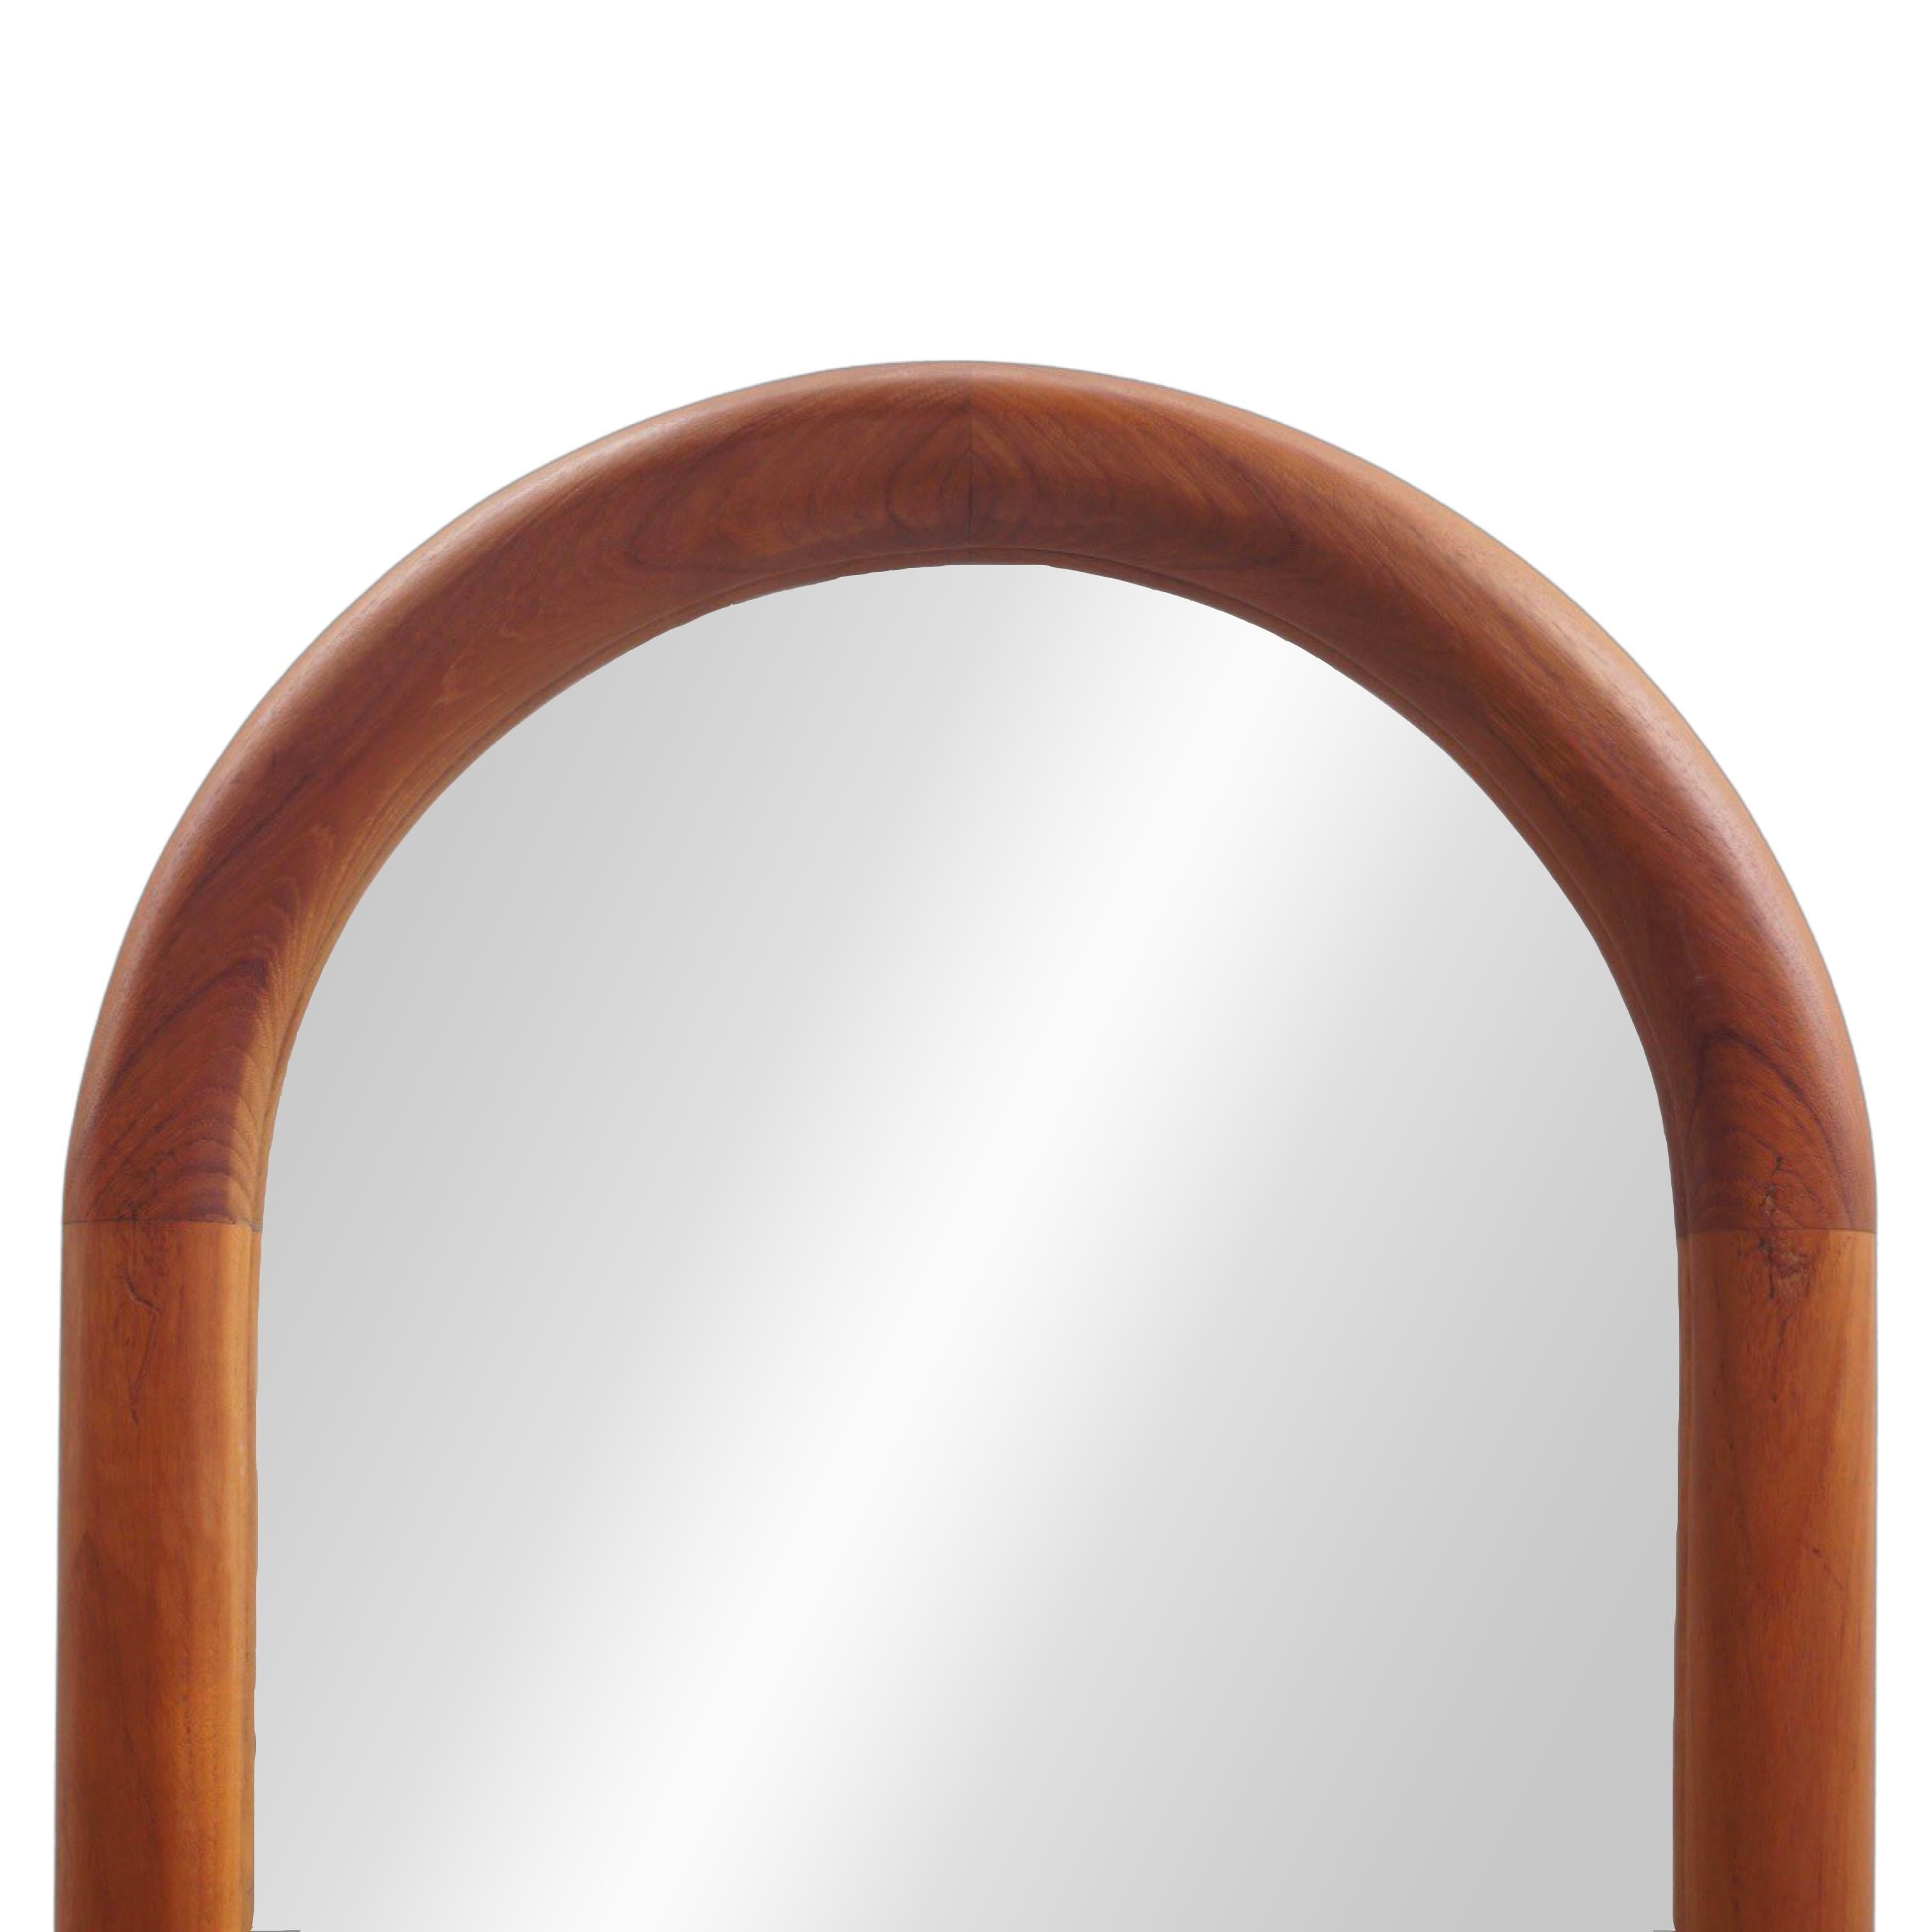 The simplicity and quality of craftmanship is the design brilliance of Mid-Century Modern style that still feels fresh and modern today. This arched mirror hits that mark with both sinuous lines and rich teakwood. It's more than just a mirror—it's a